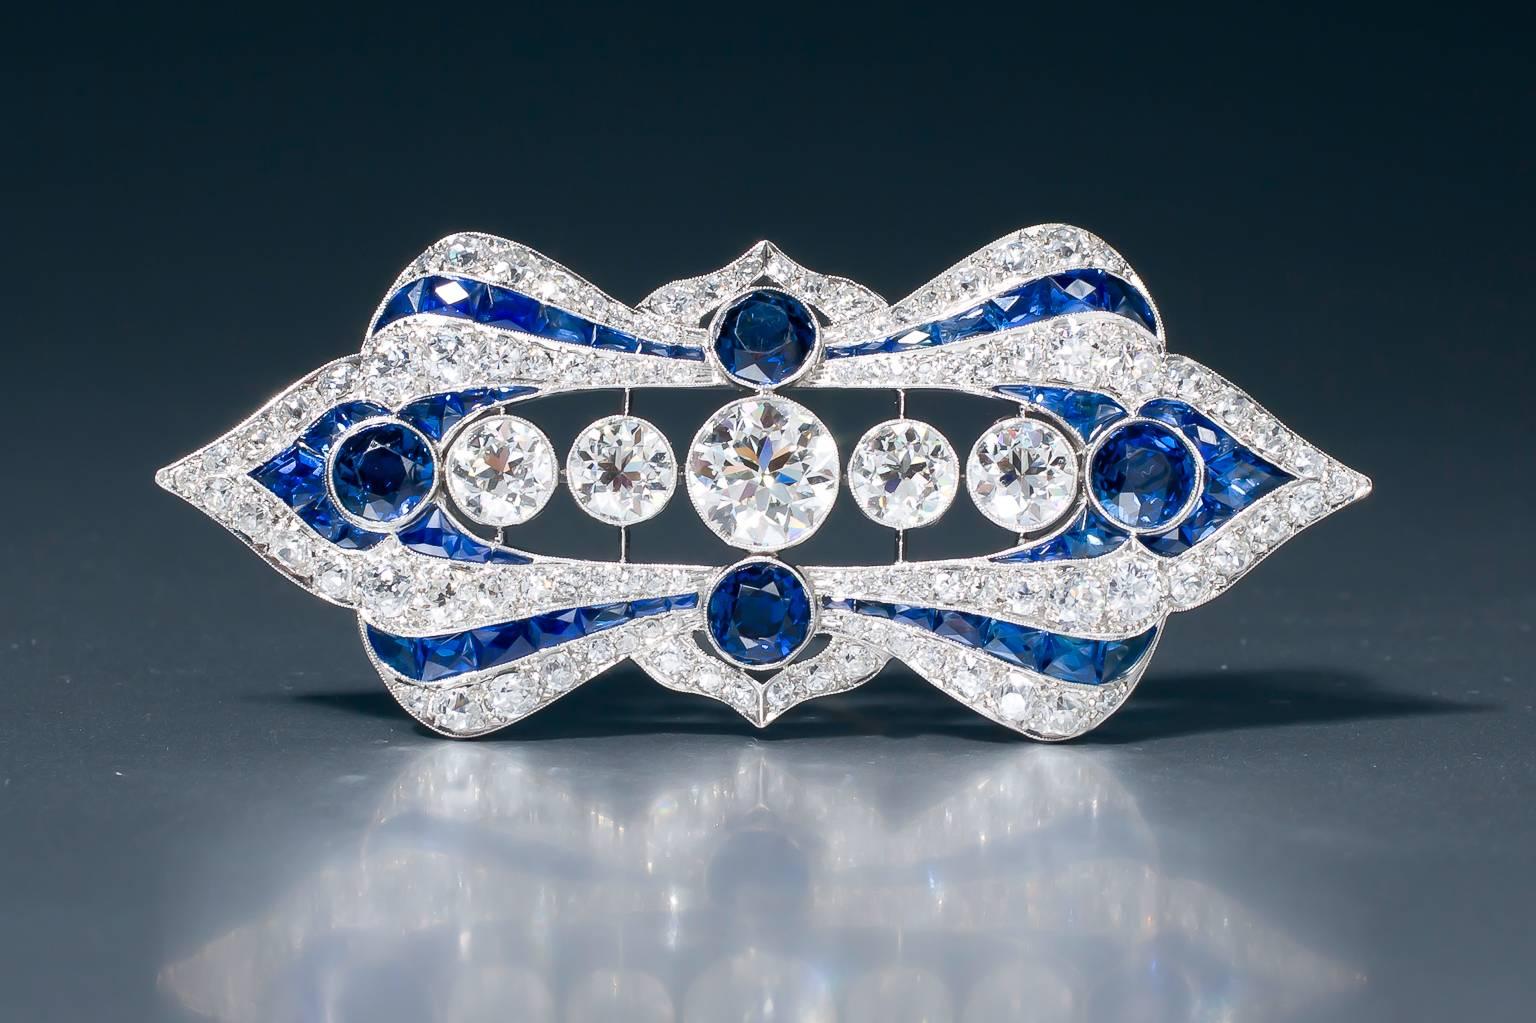 A spectacular Art Deco sapphire and diamond plaque brooch, set throughout with old European cut diamonds and calibré-cut sapphires. Five large old European cut diamonds and 4 large circular cut sapphires are collet set. 
The platinum mount shows